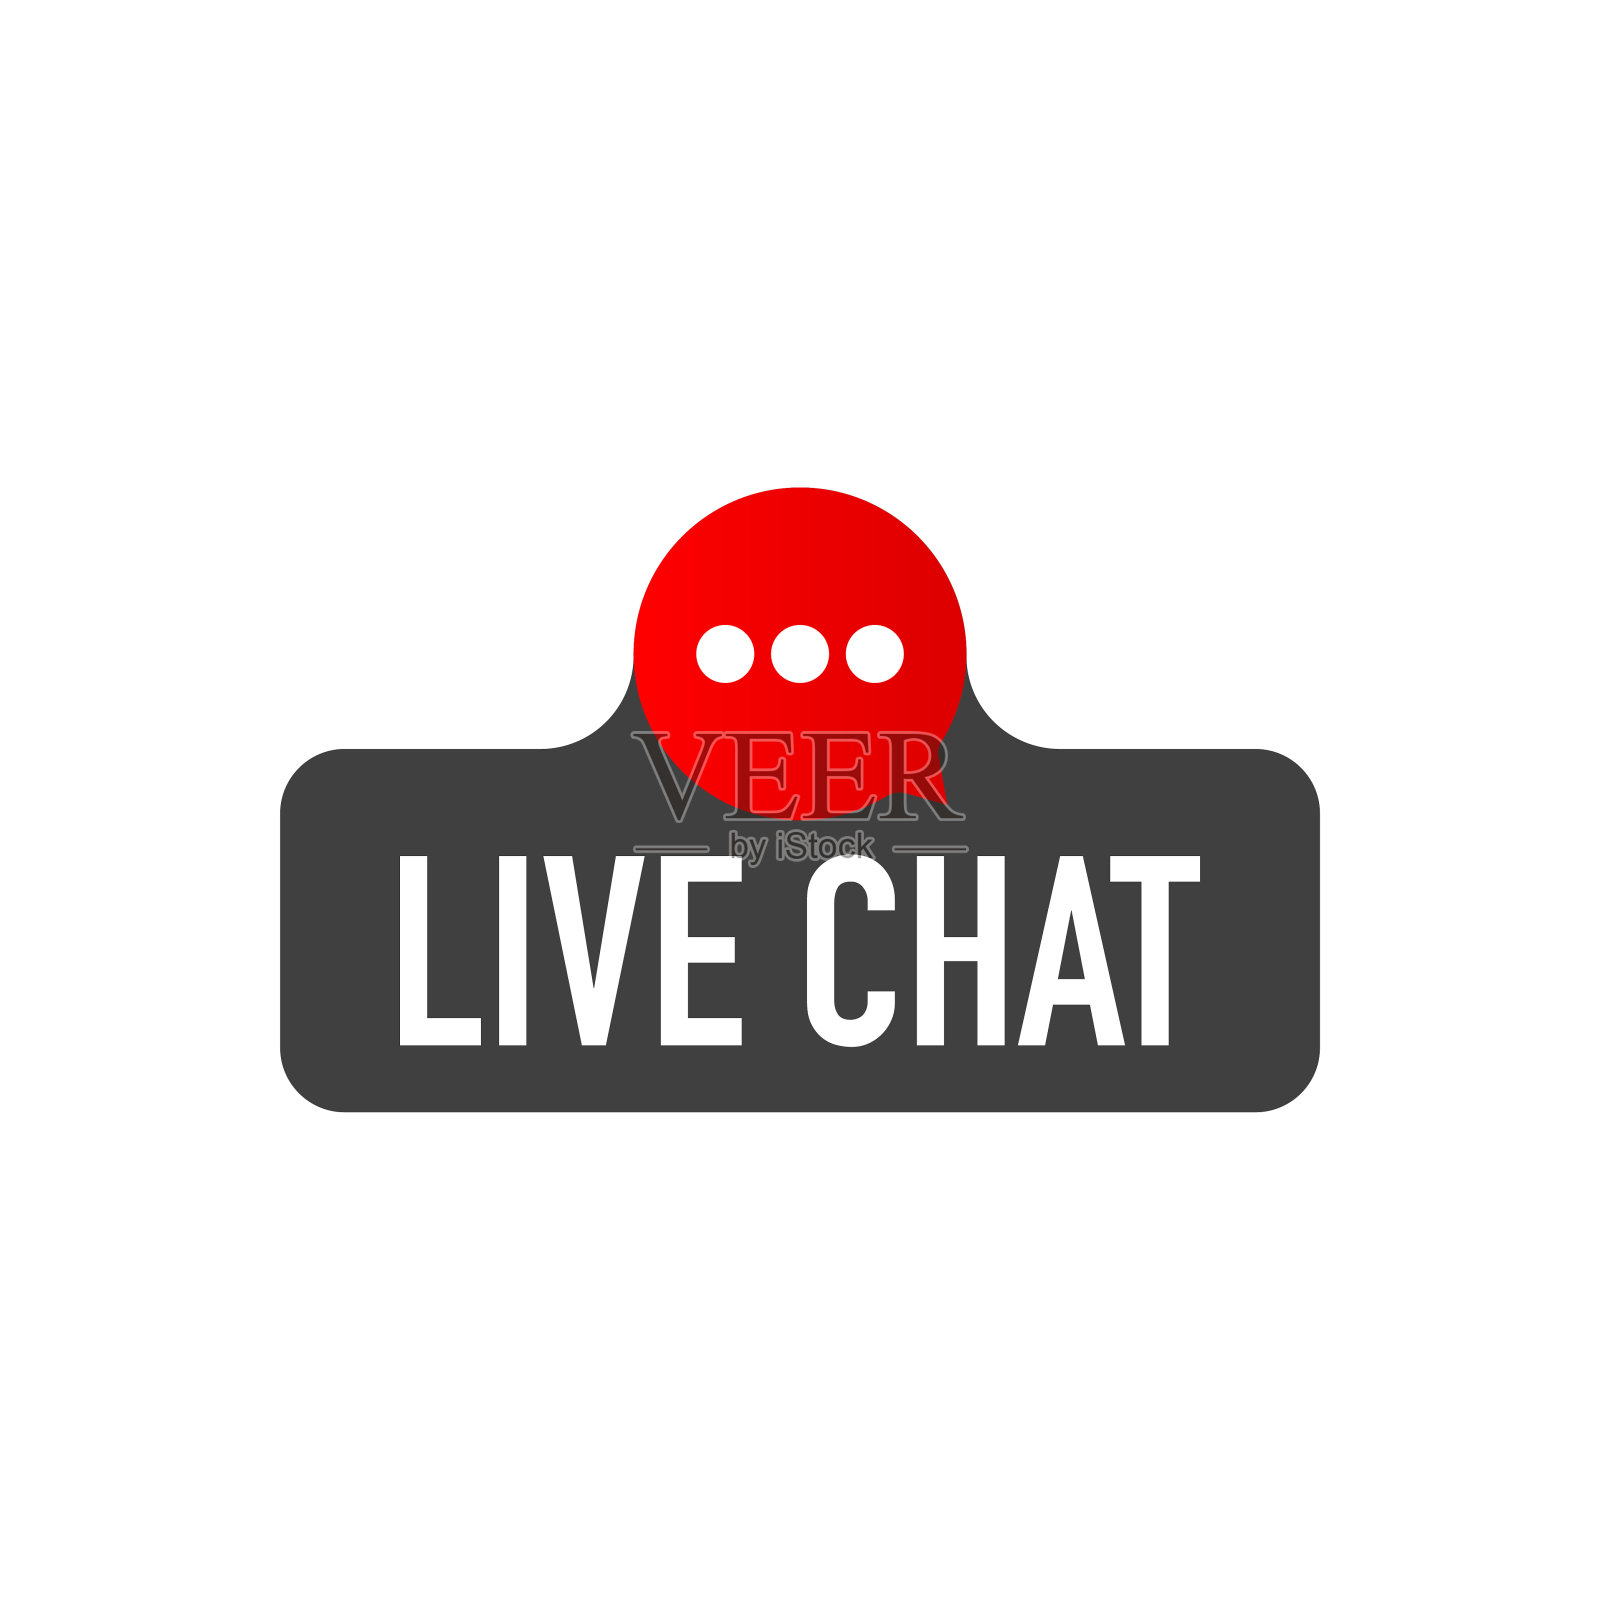 LIVE CHAT on speech bubble label on white background。插画图片素材